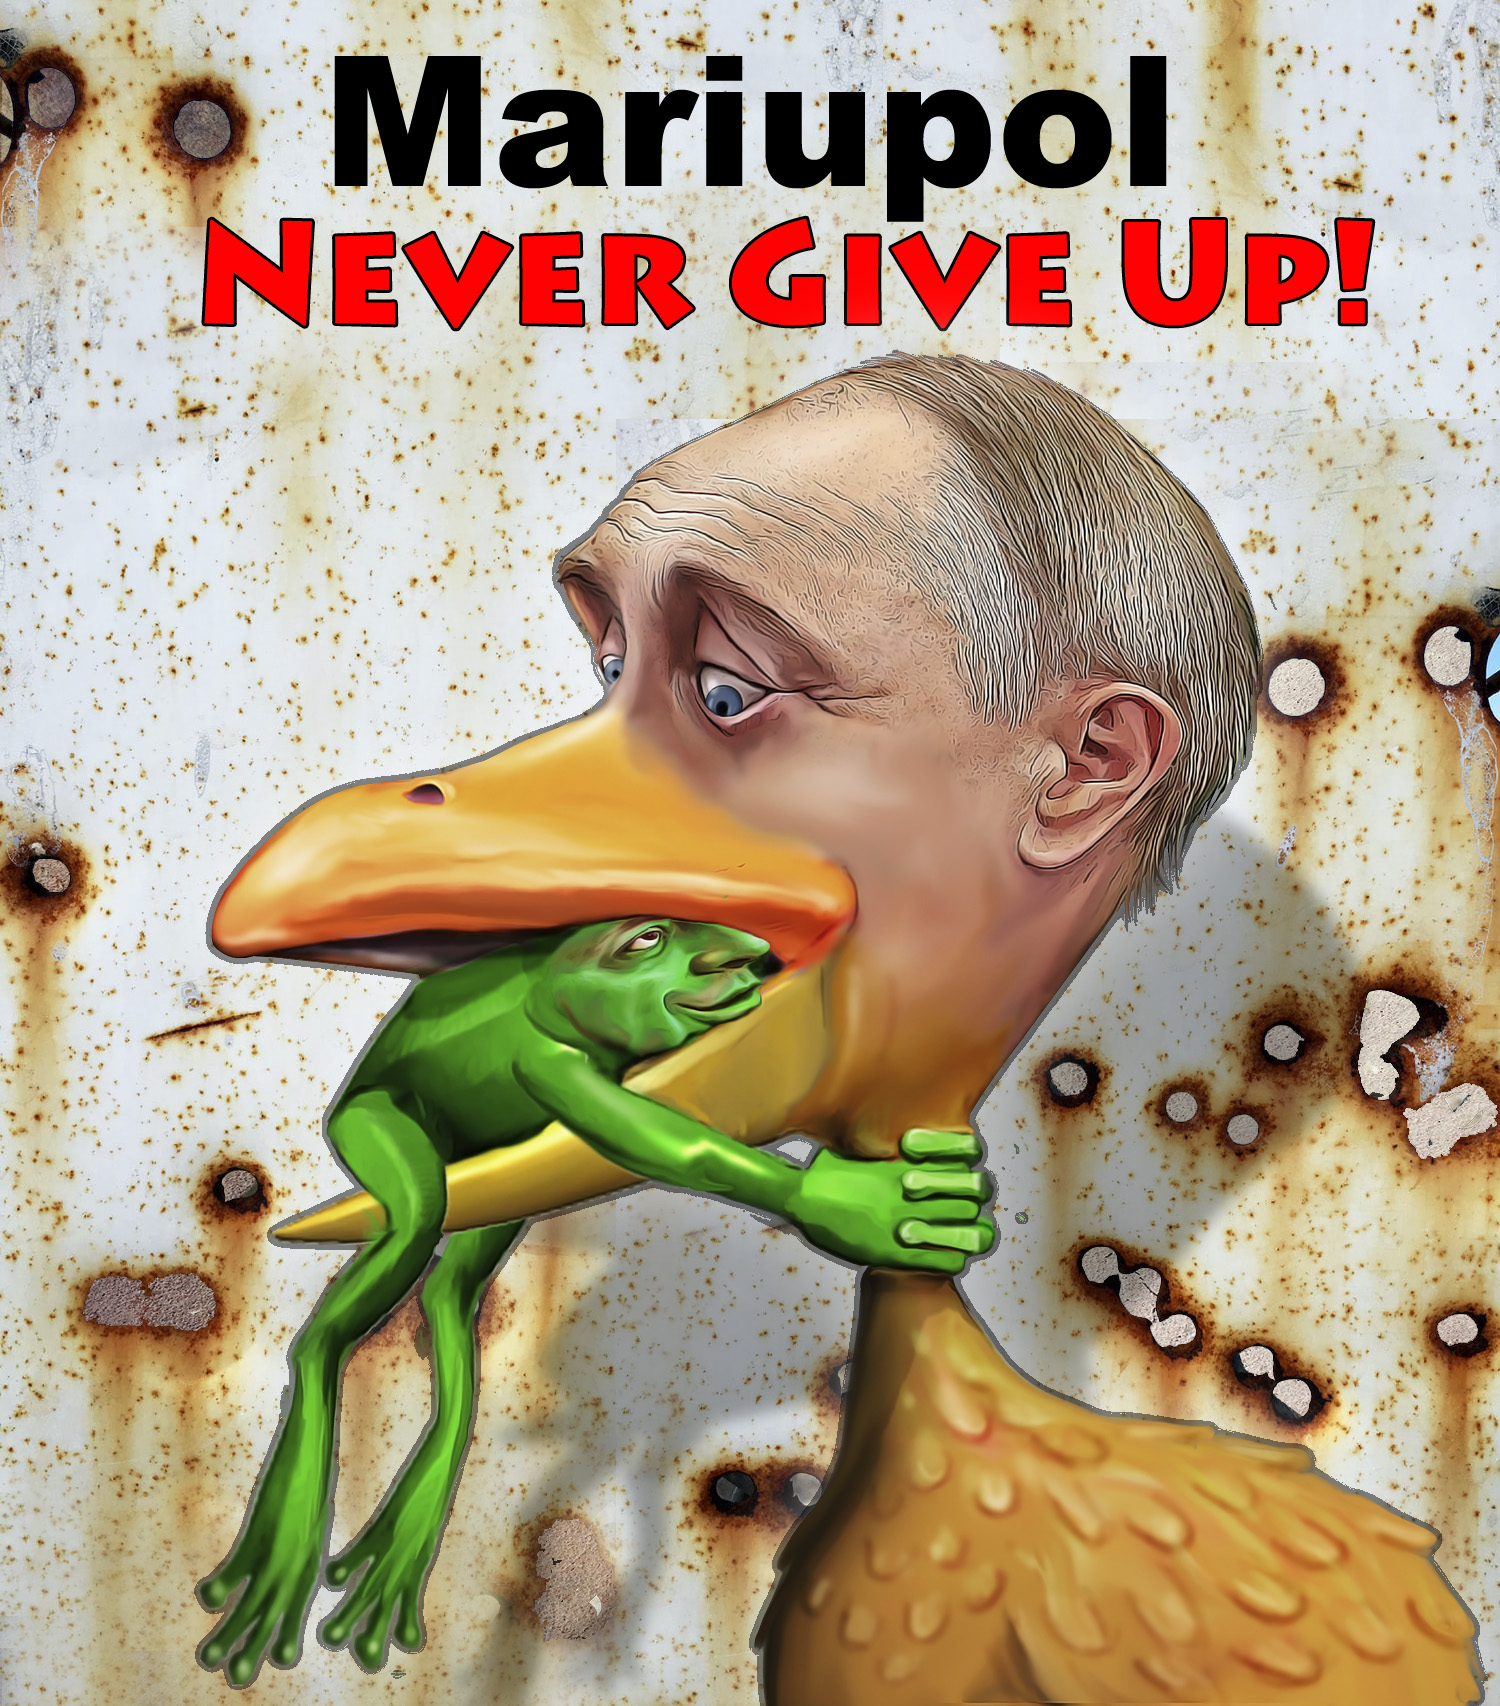 Mariupol Never Give Up!